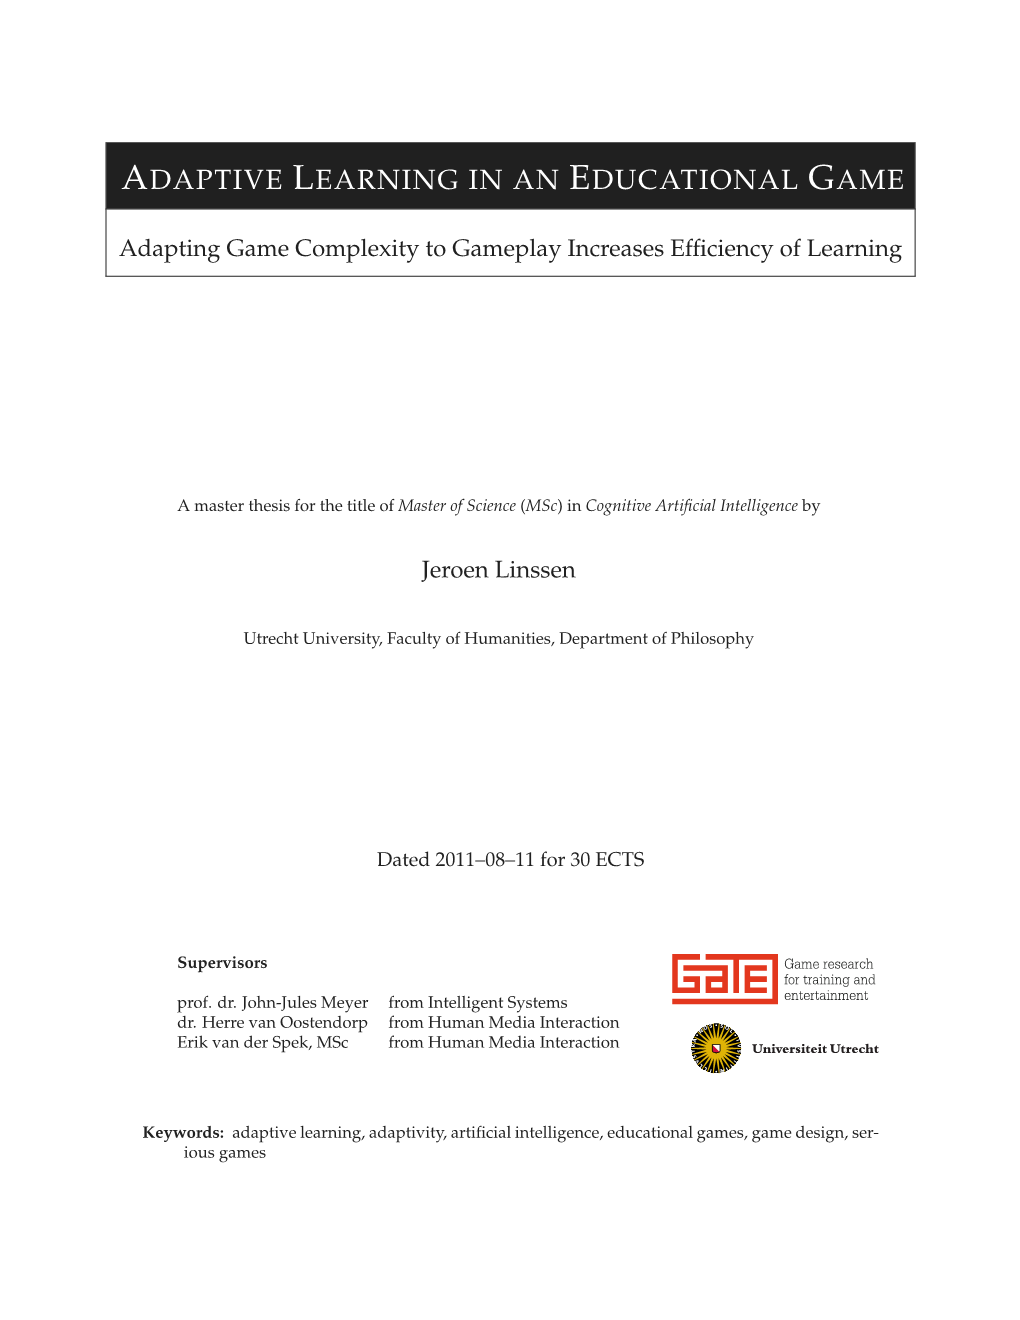 Adaptive Learning in an Educational Game